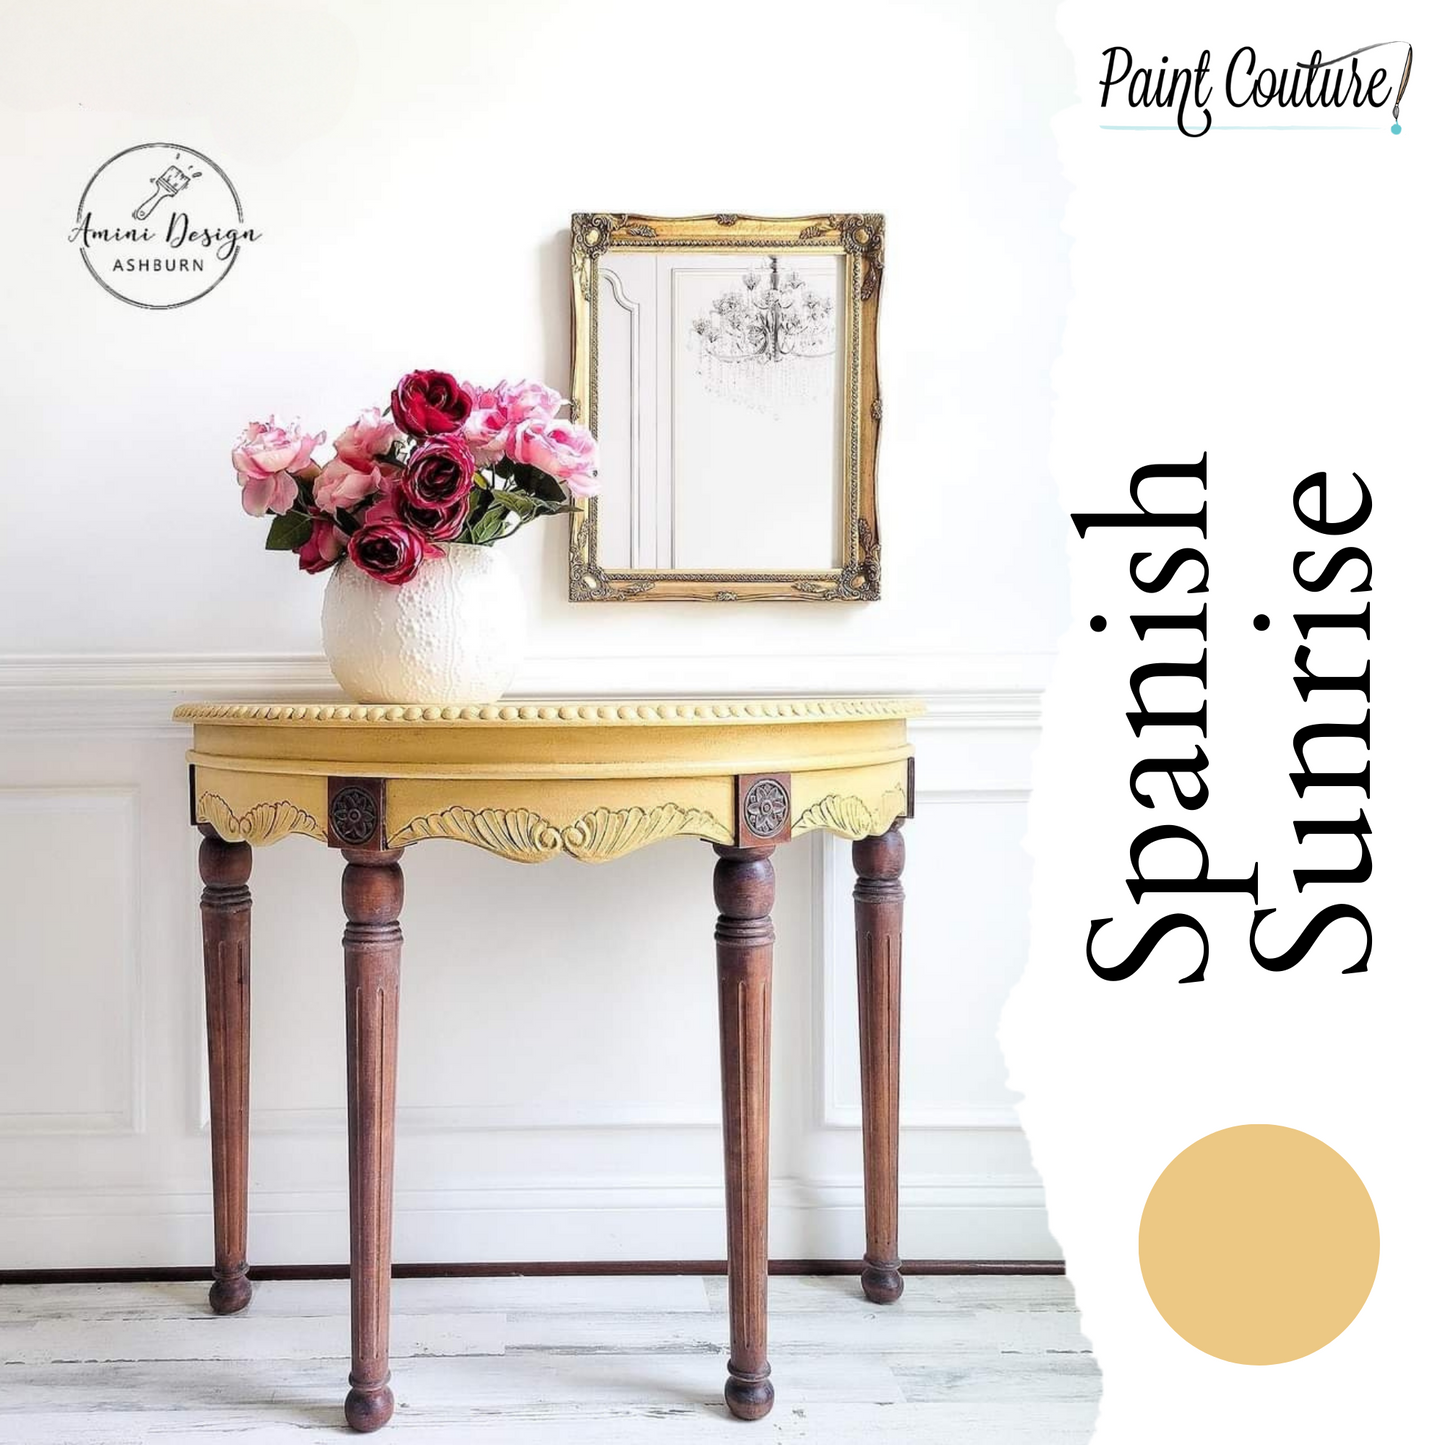 Paint Couture Spanish Sunrise - Acrylic Mineral Paint with a Flat Finish!